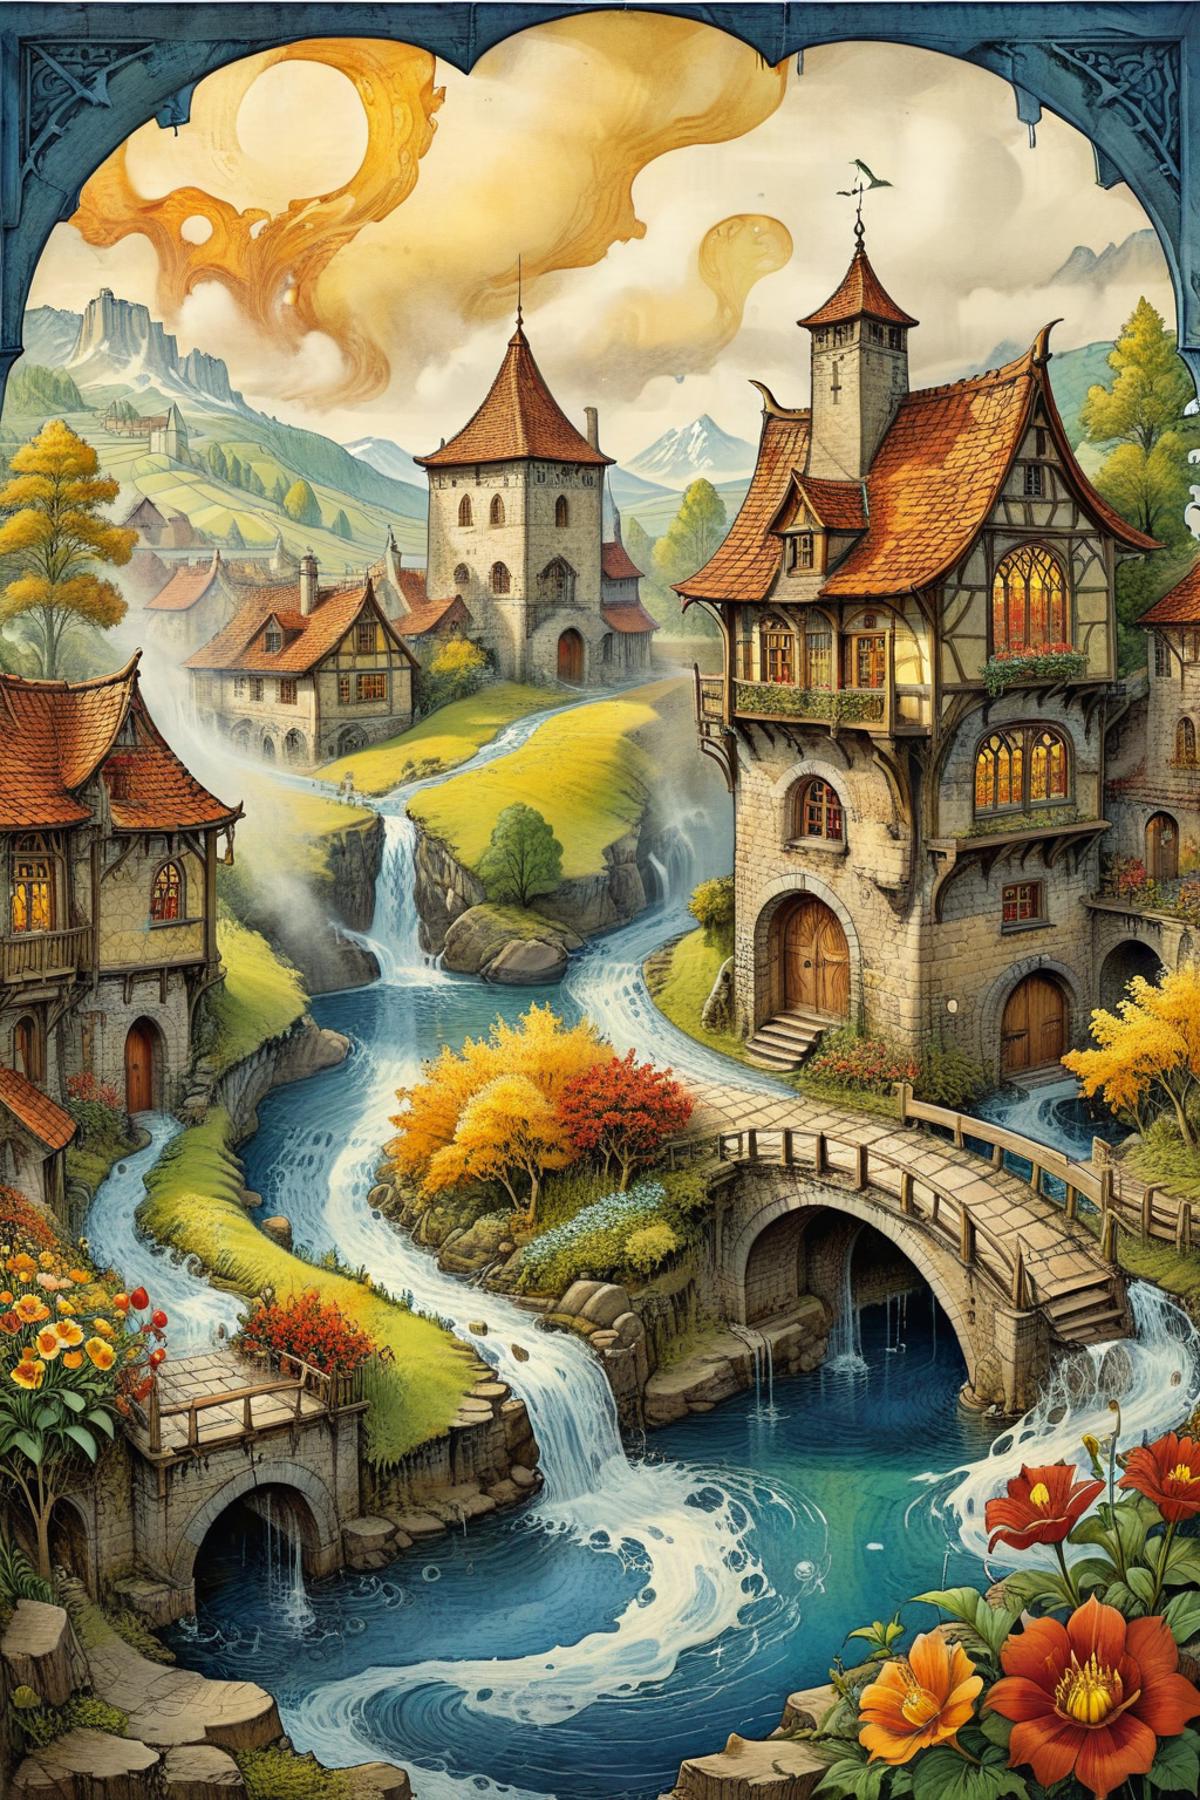 An Illustration of a Medieval Town with a River Running Through the Middle